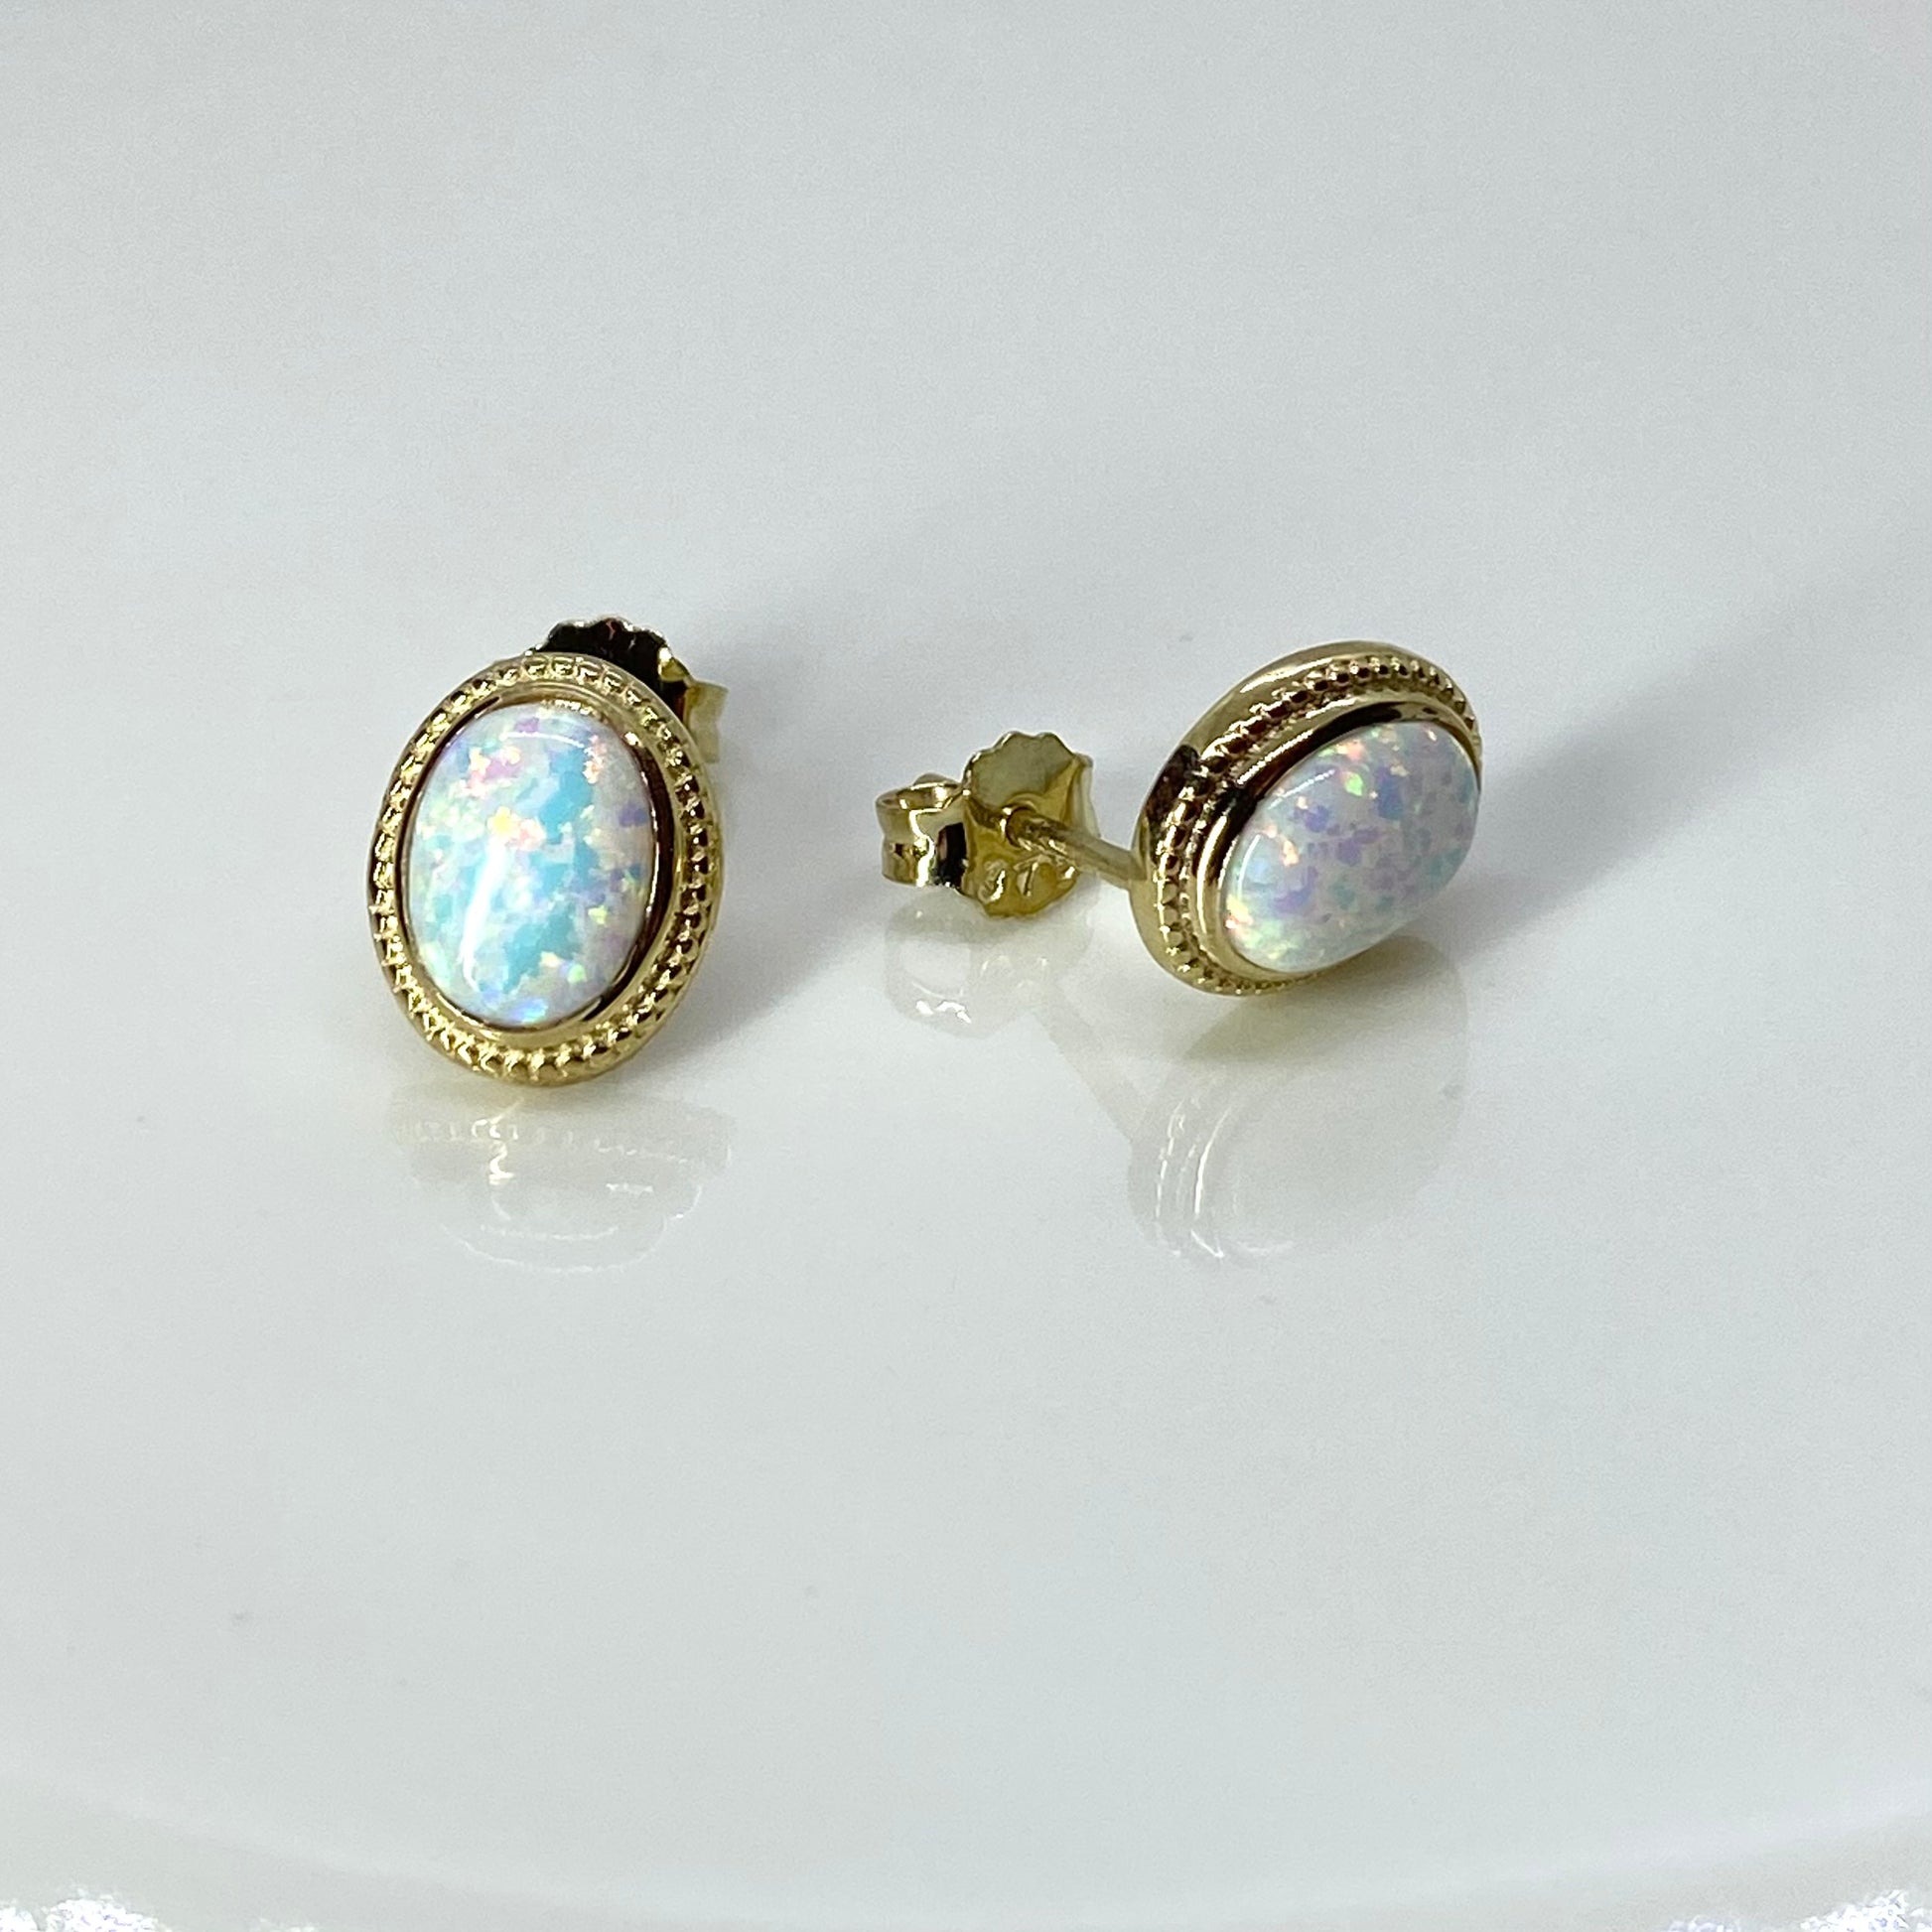 9ct Gold Oval Opalique Stud Earrings with Beaded Edge - John Ross Jewellers